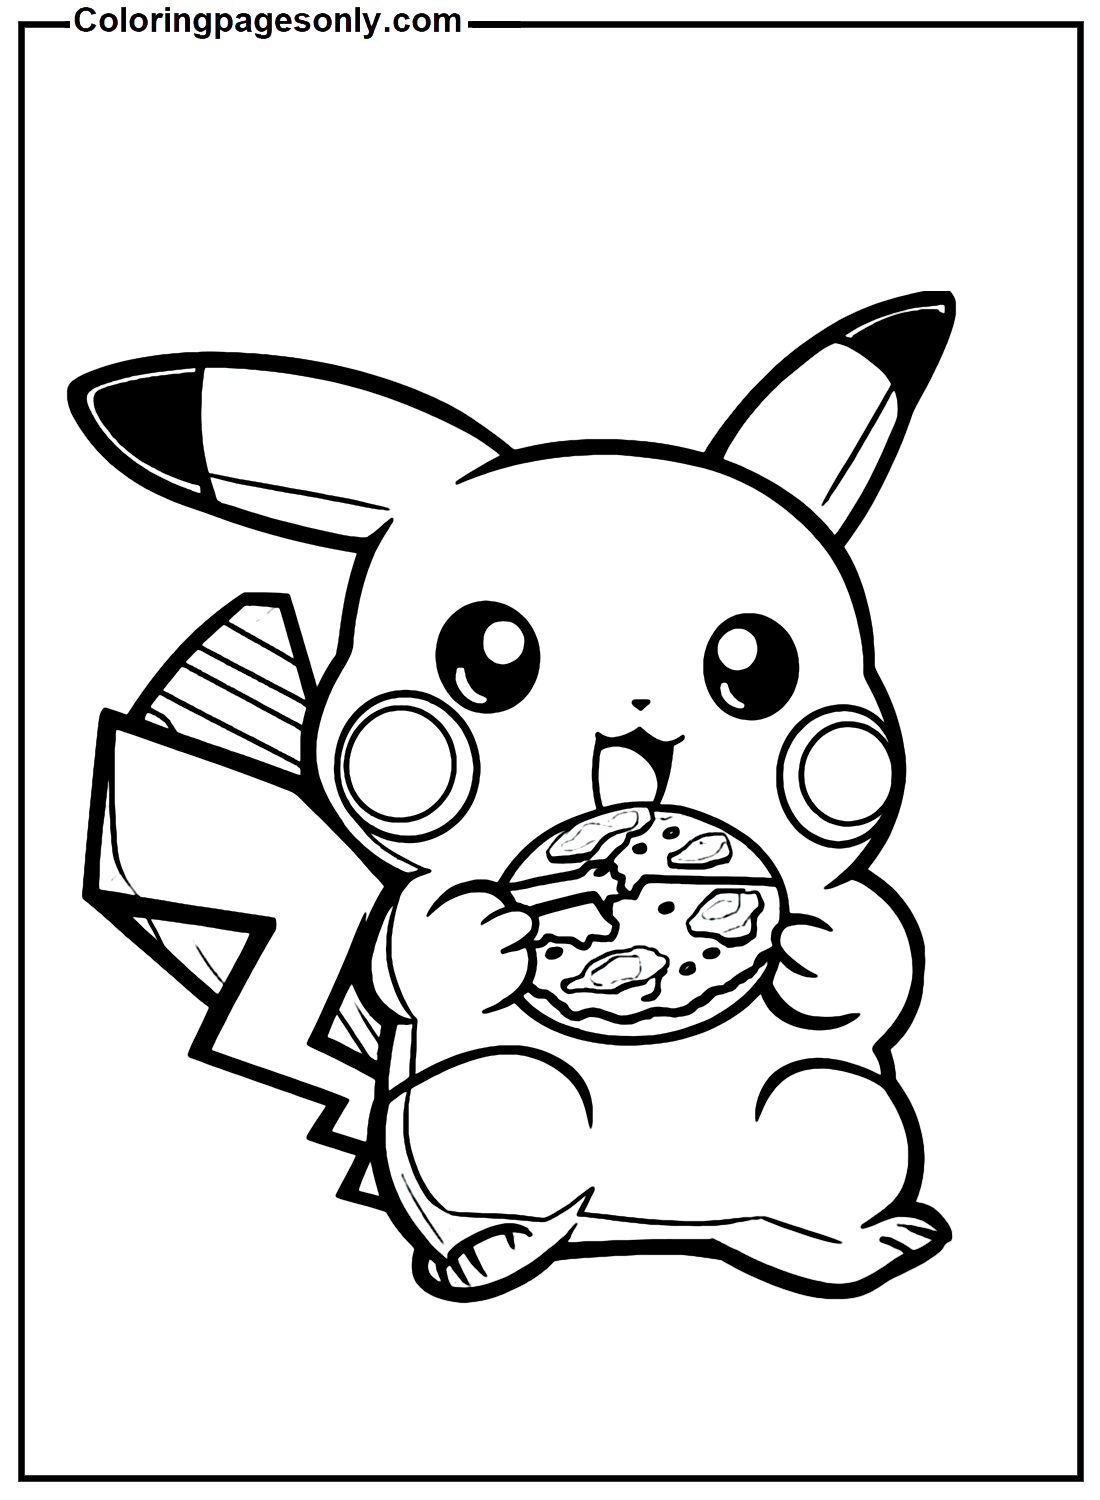 Pikachu Eating Cookies Coloring Pages